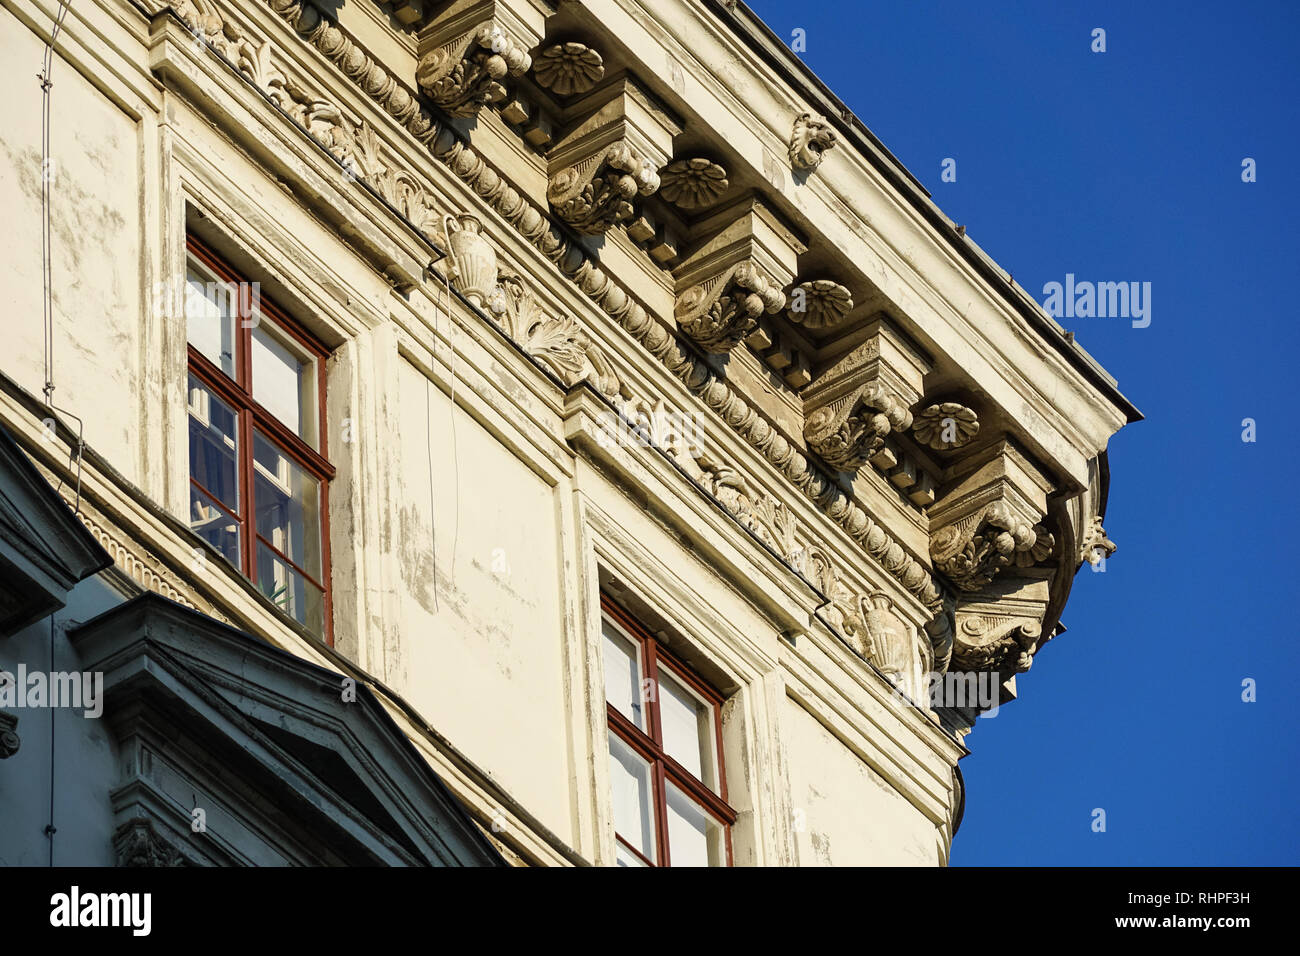 Architectural details on buildings in Vienna, Austria Stock Photo